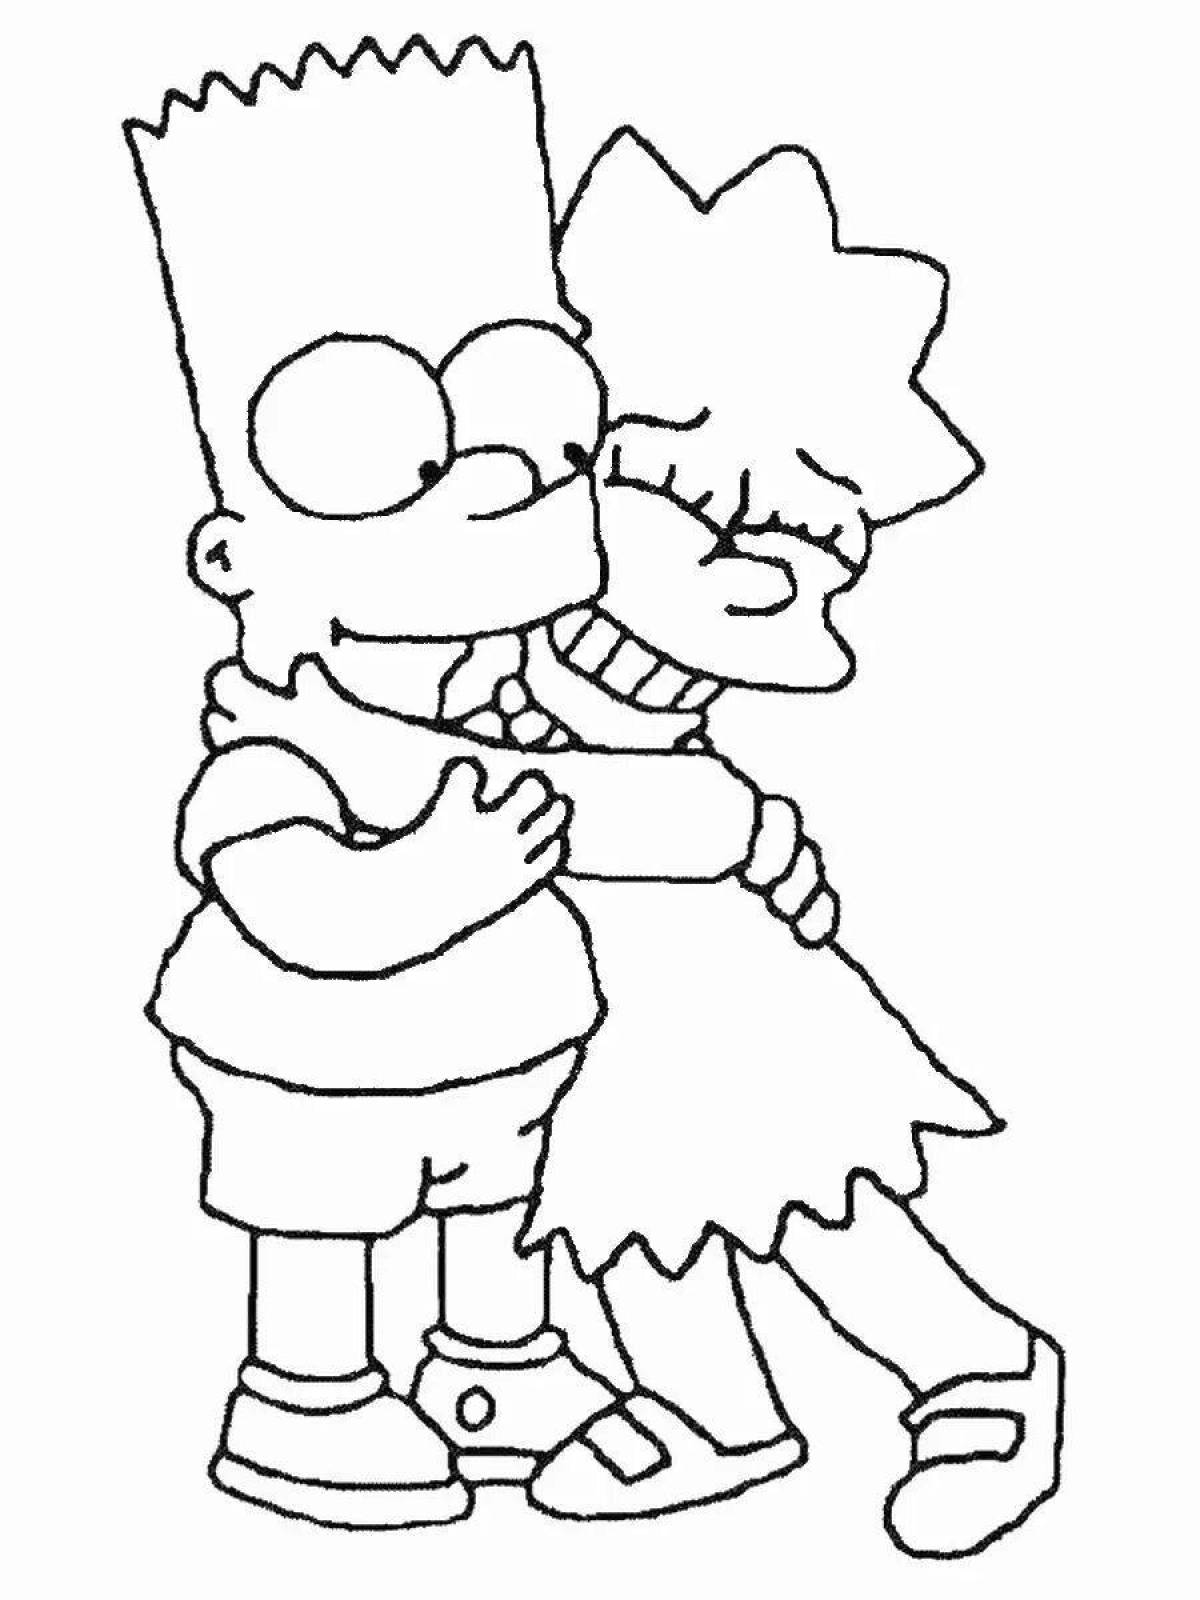 Lisa simpson's amazing coloring page